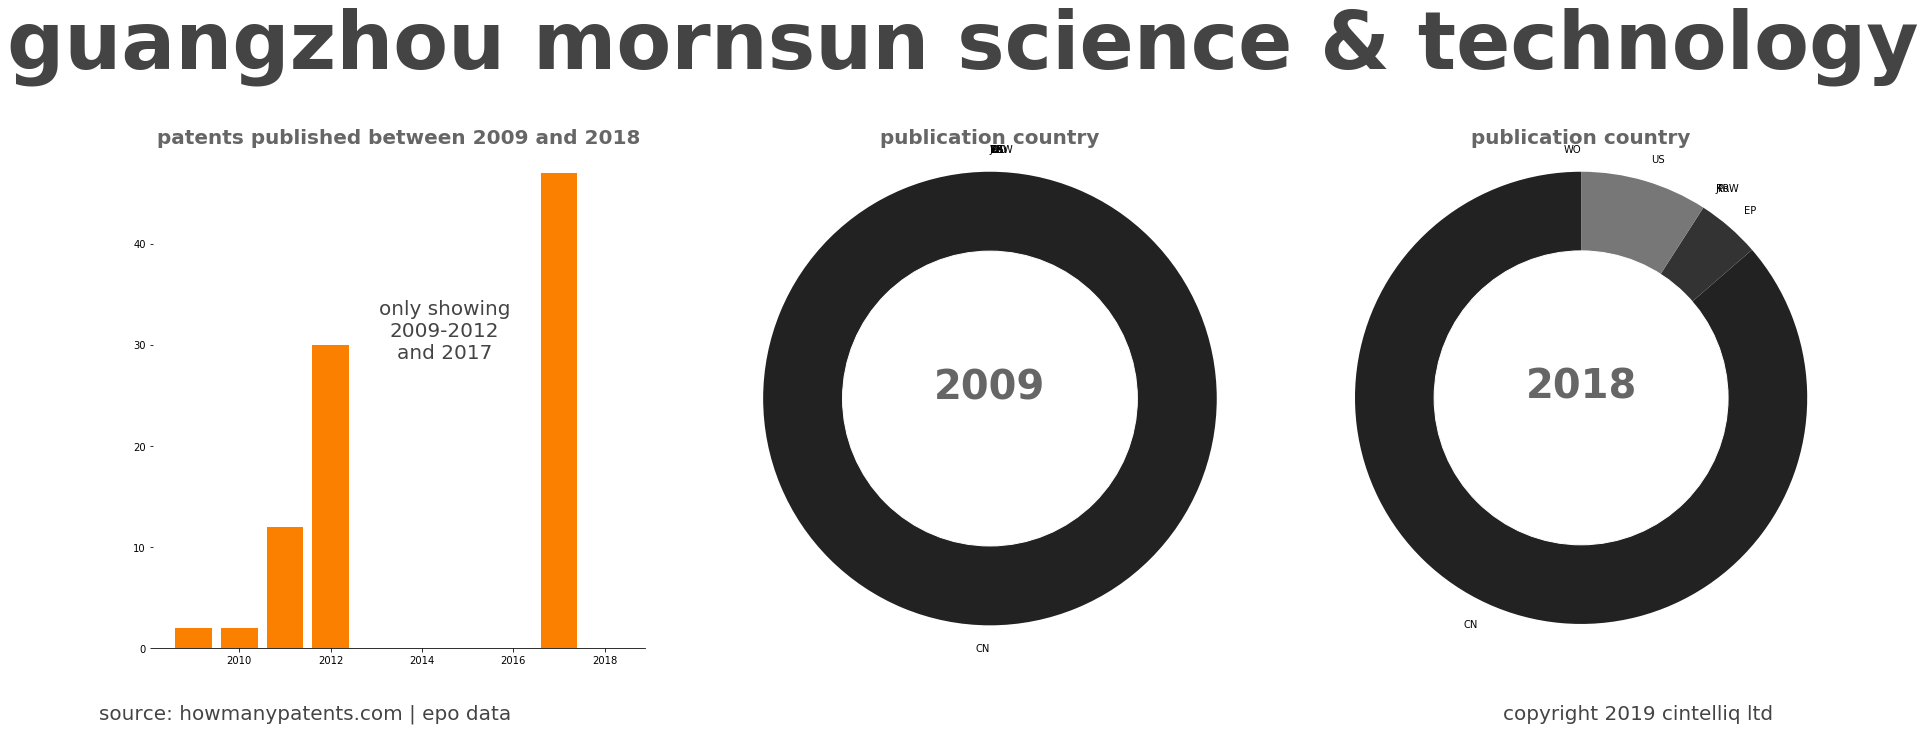 summary of patents for Guangzhou Mornsun Science & Technology